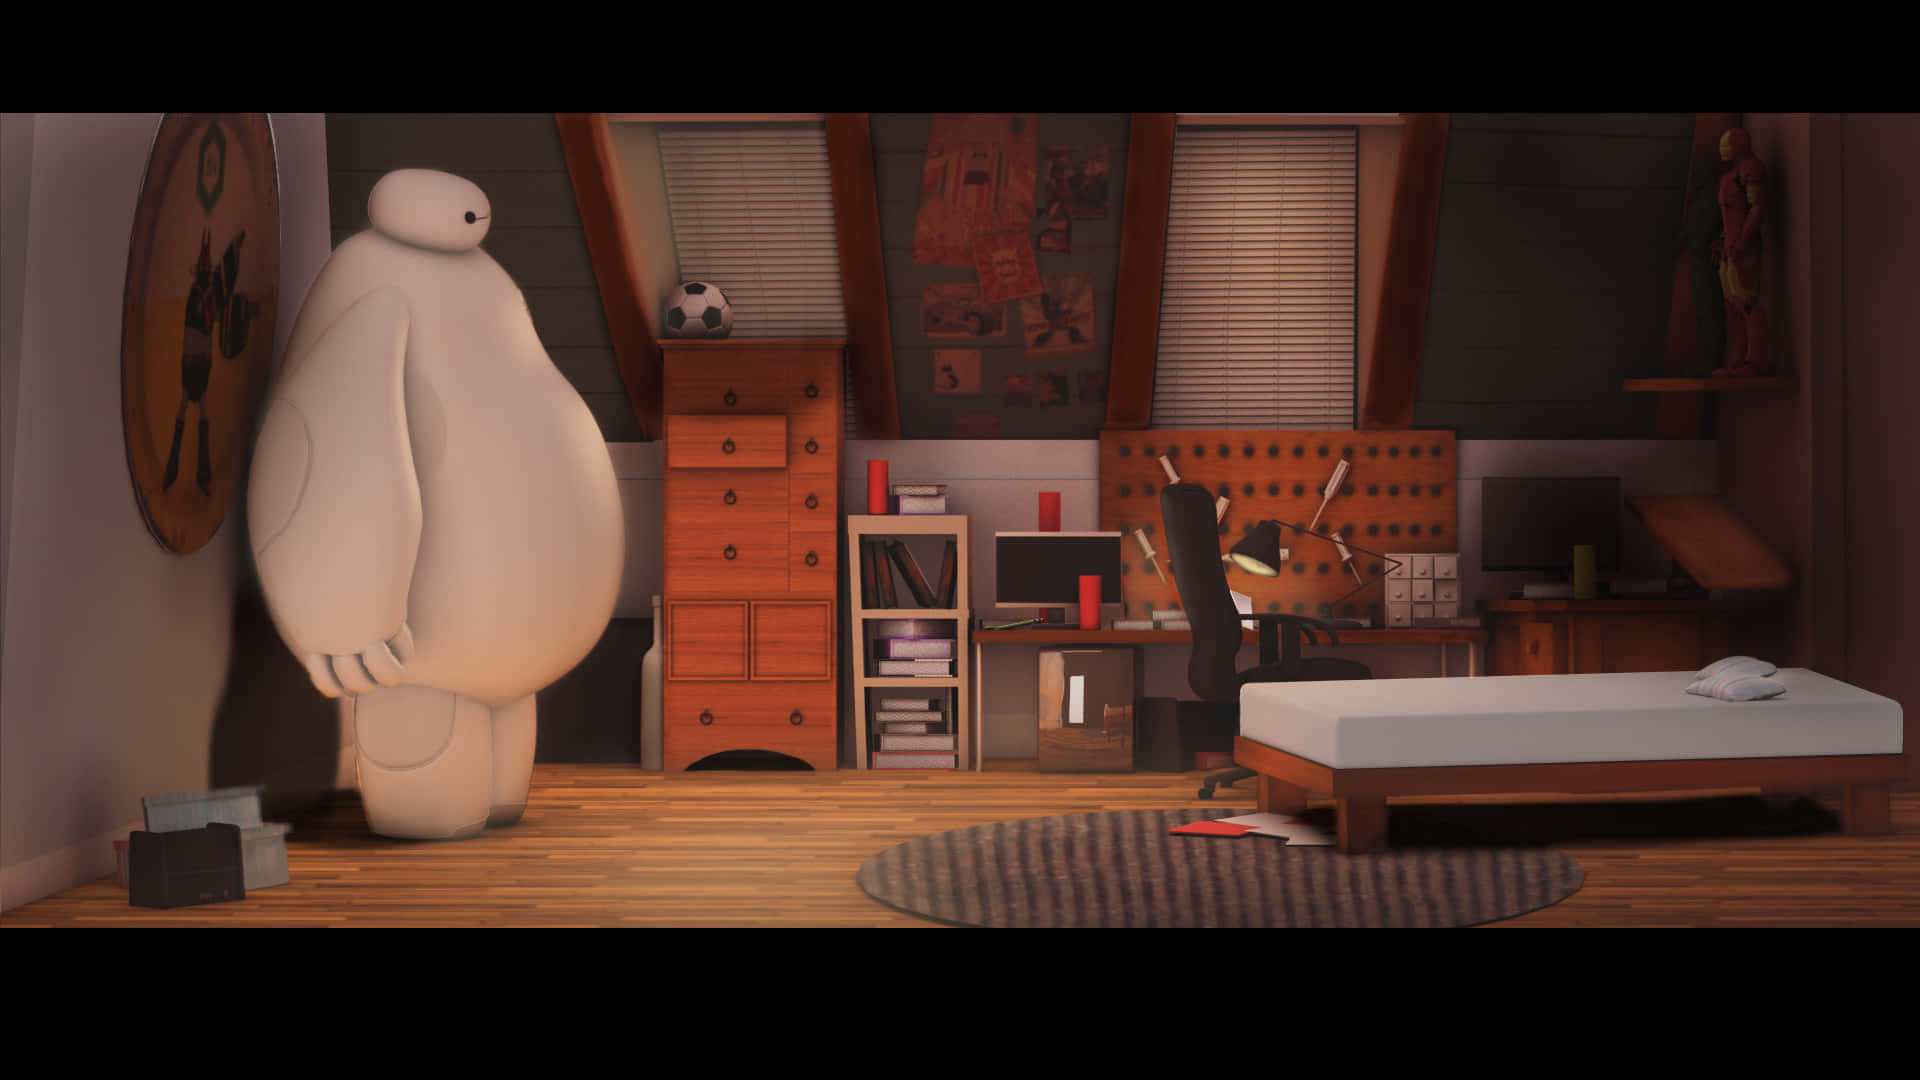 Look no further for the perfect #BigHero6 wallpaper!